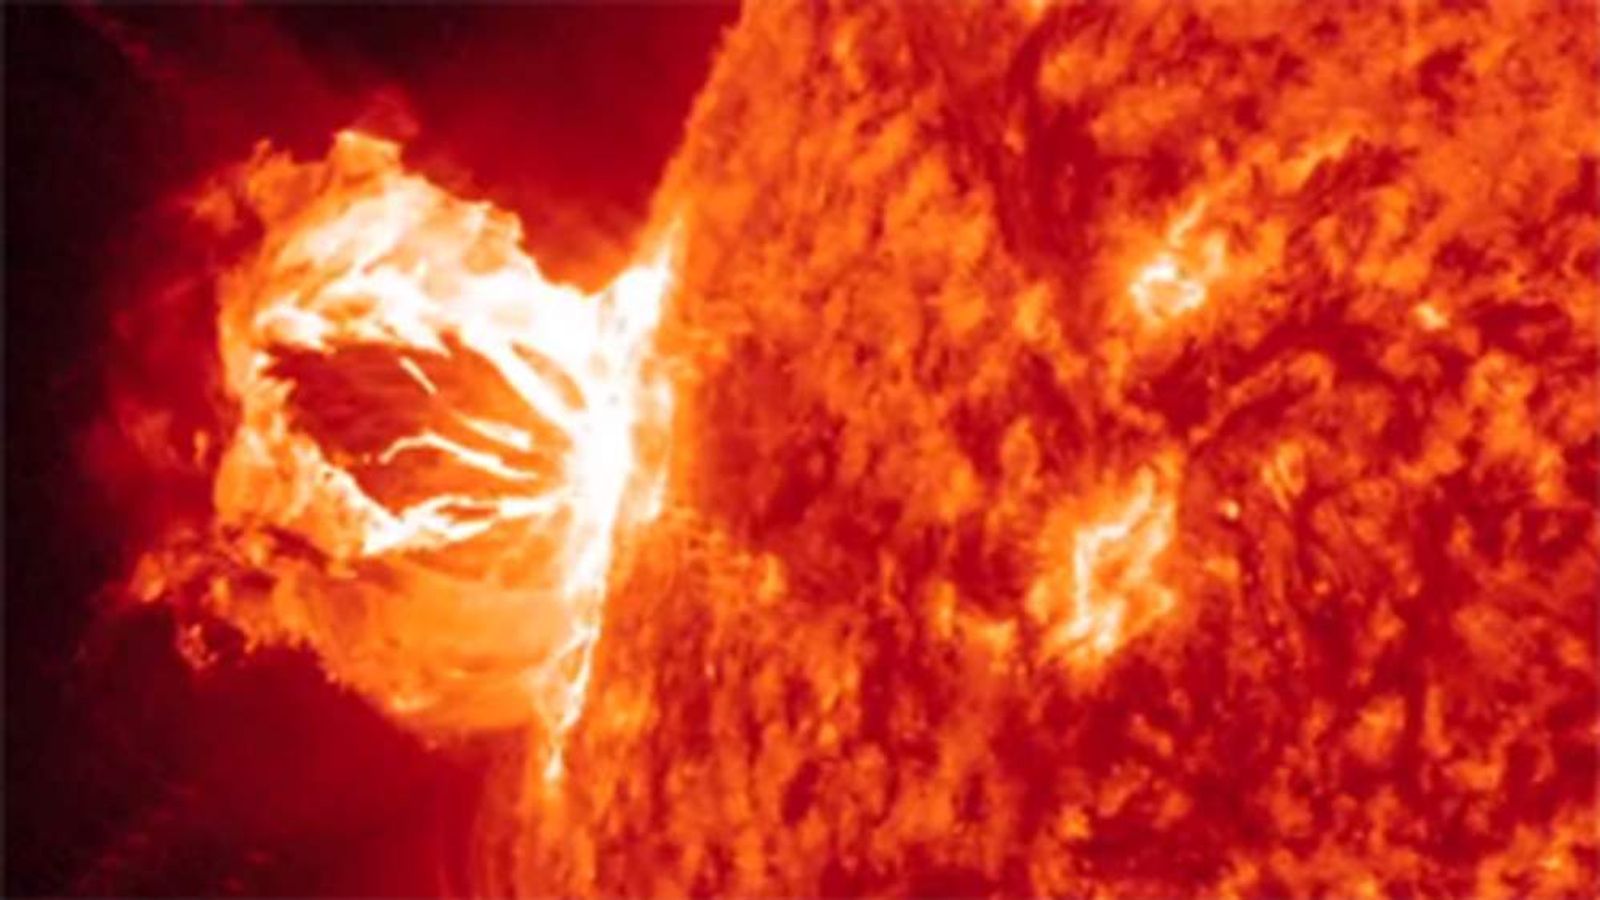 Solar Superstorm UK 'Must Brace For Threat' Science & Tech News